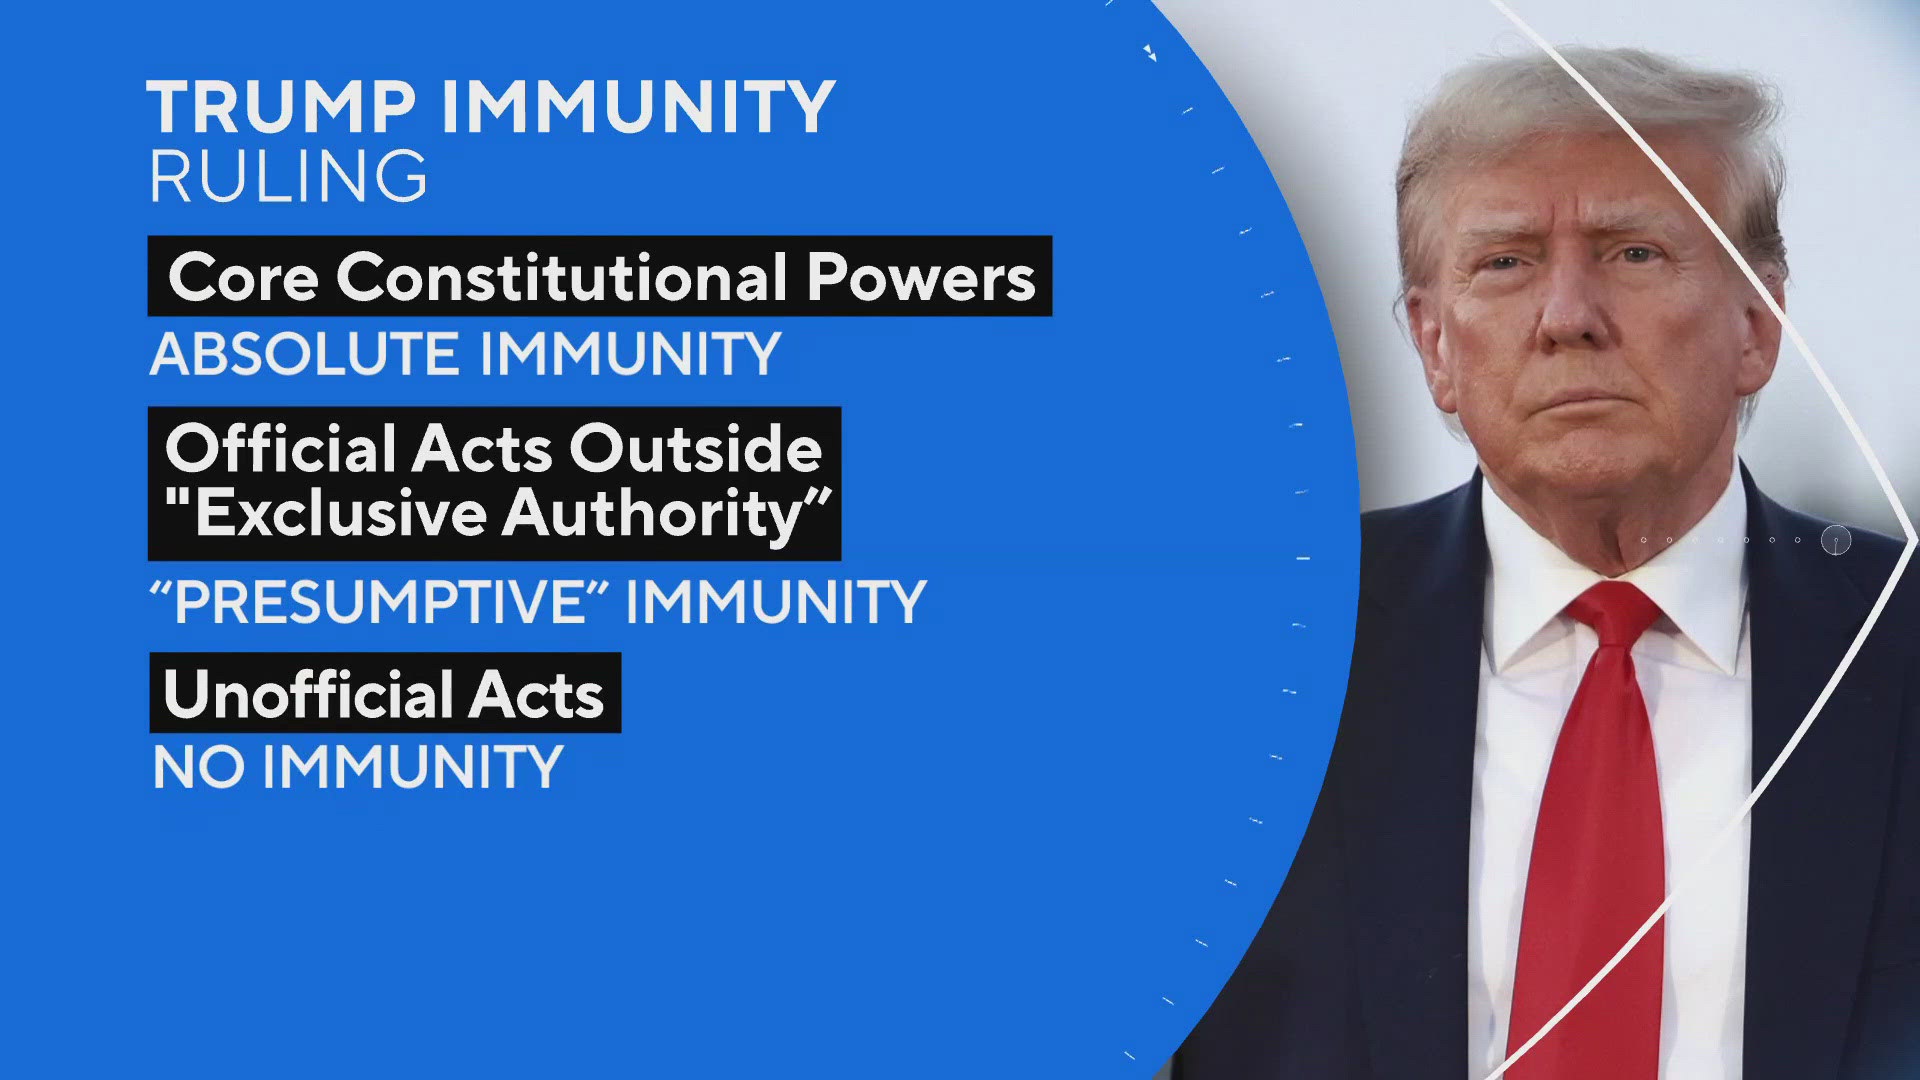 Former President Donald Trump is hailing today's decision by the Supreme Court on Presidential Immunity.